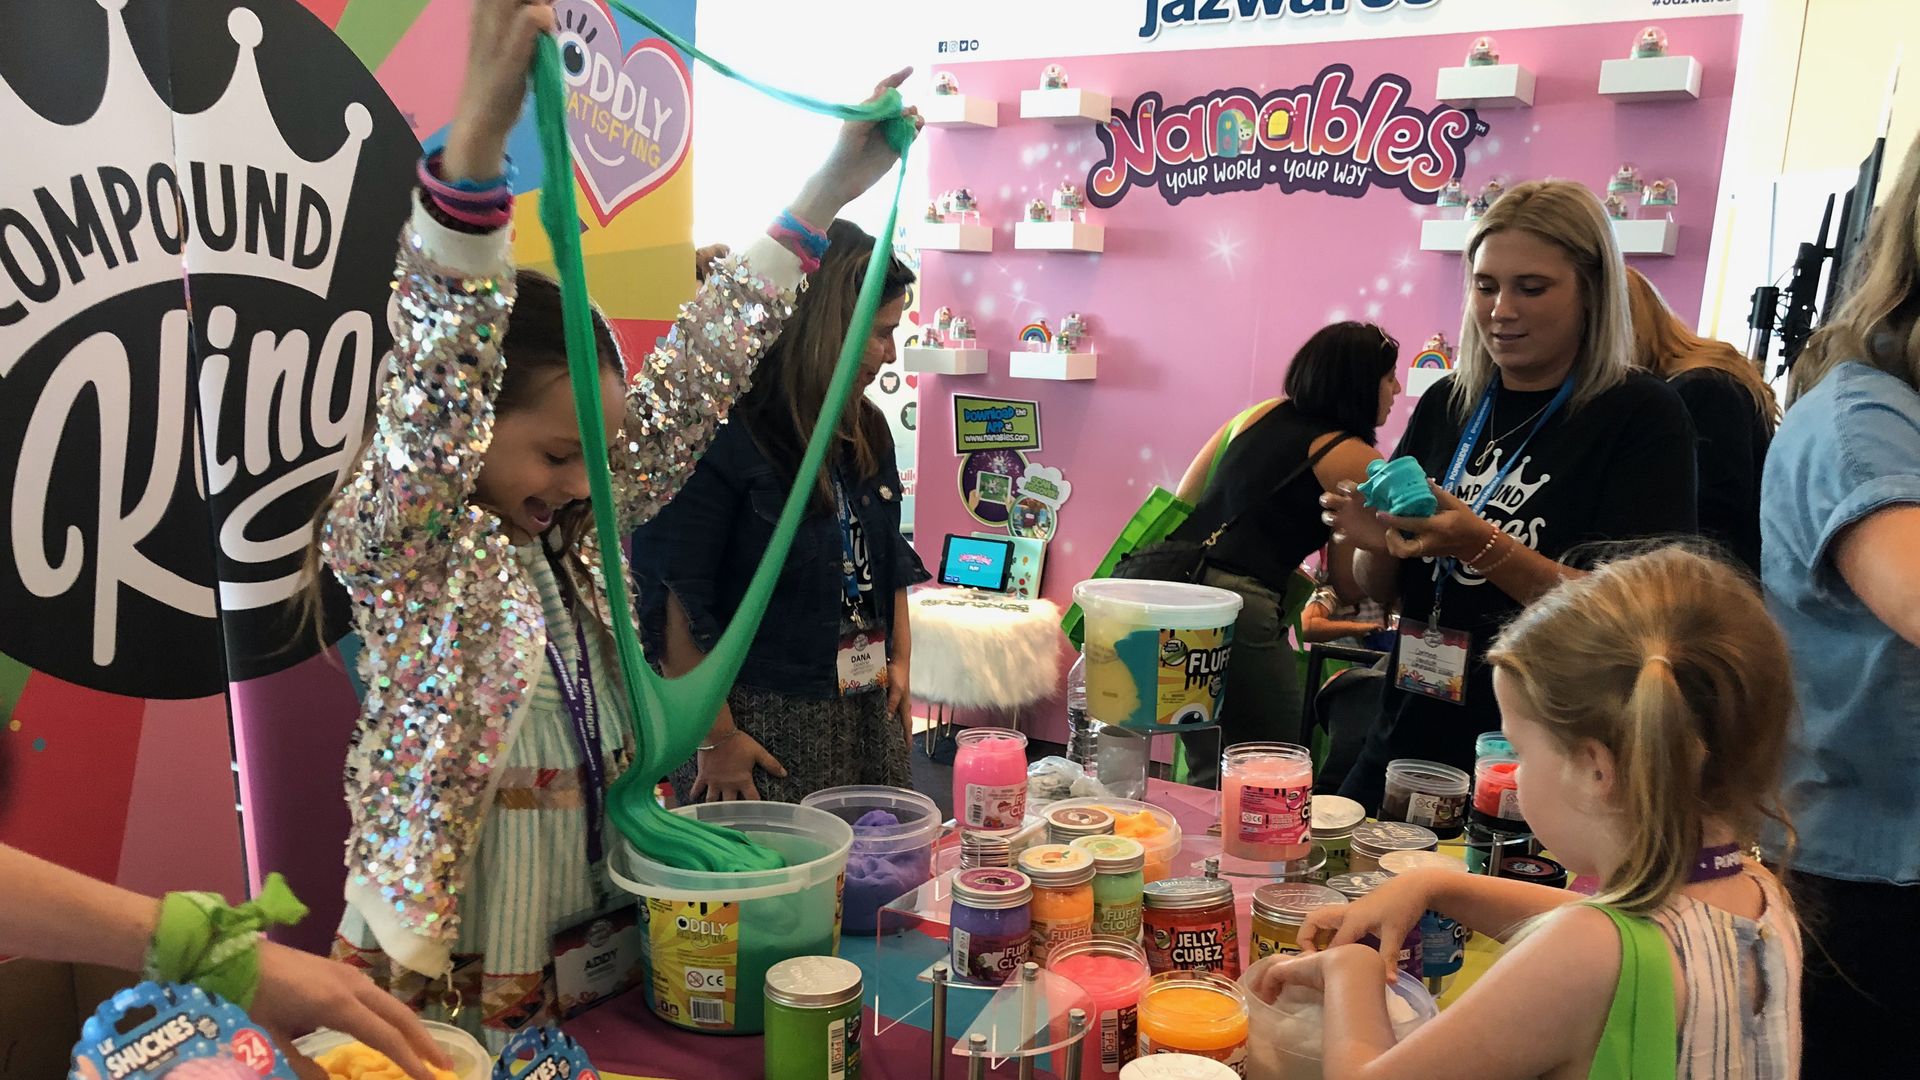 Children playing with slime toys at an industry trade show.